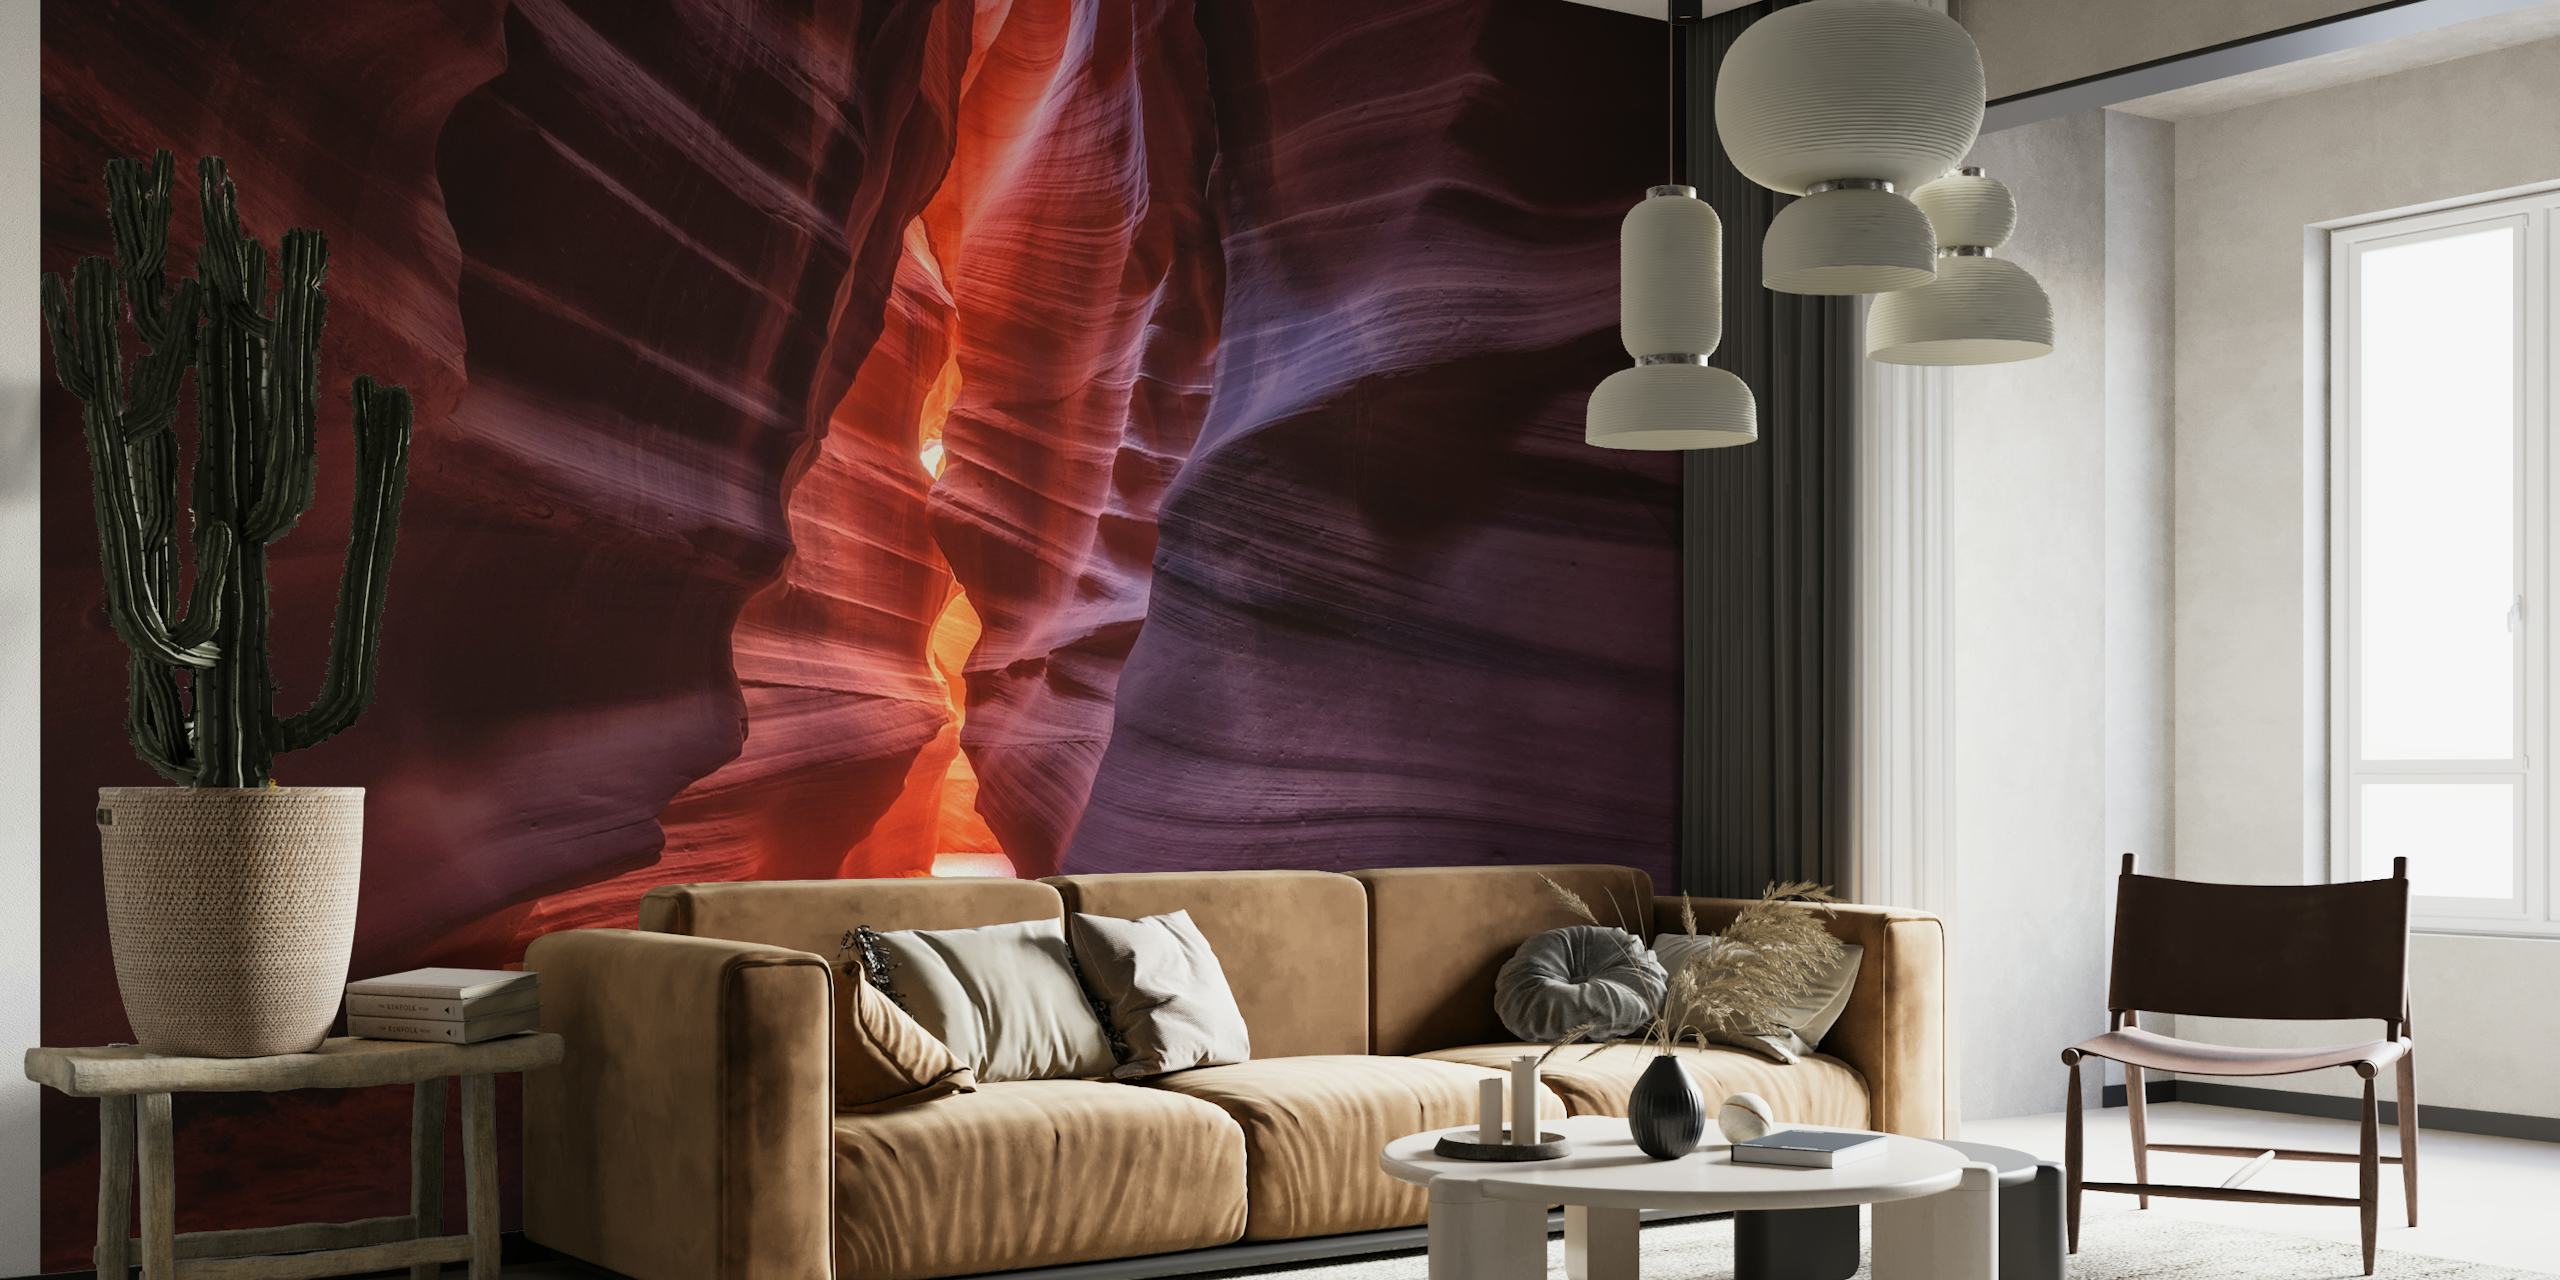 Antelope Canyon wall mural with warm hues and smooth rock formations